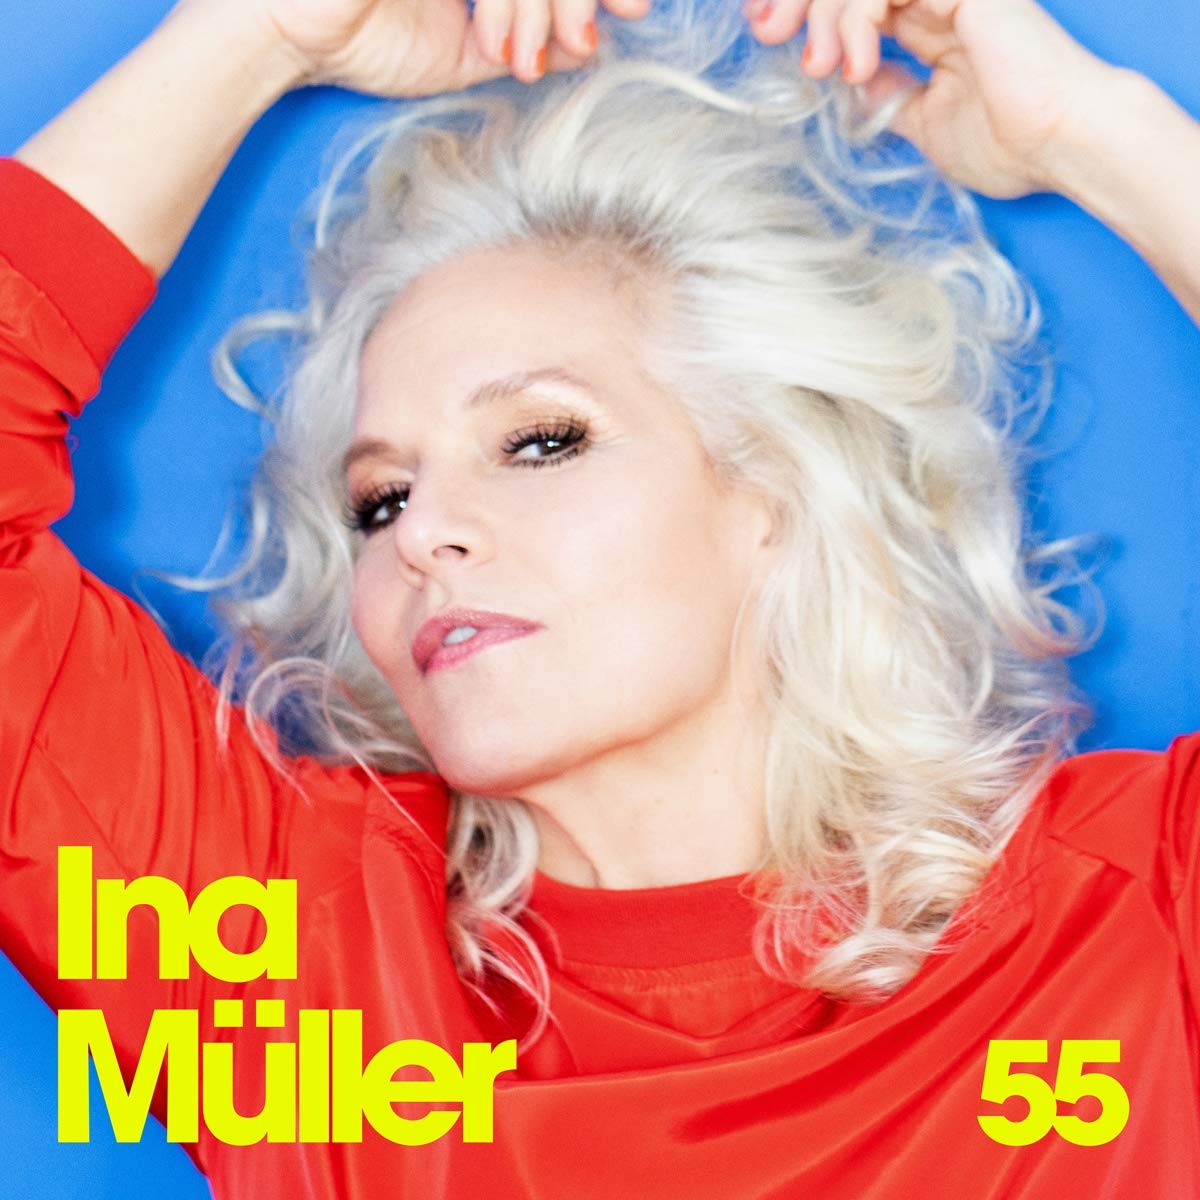 Ina Müller – 55 (2020) 